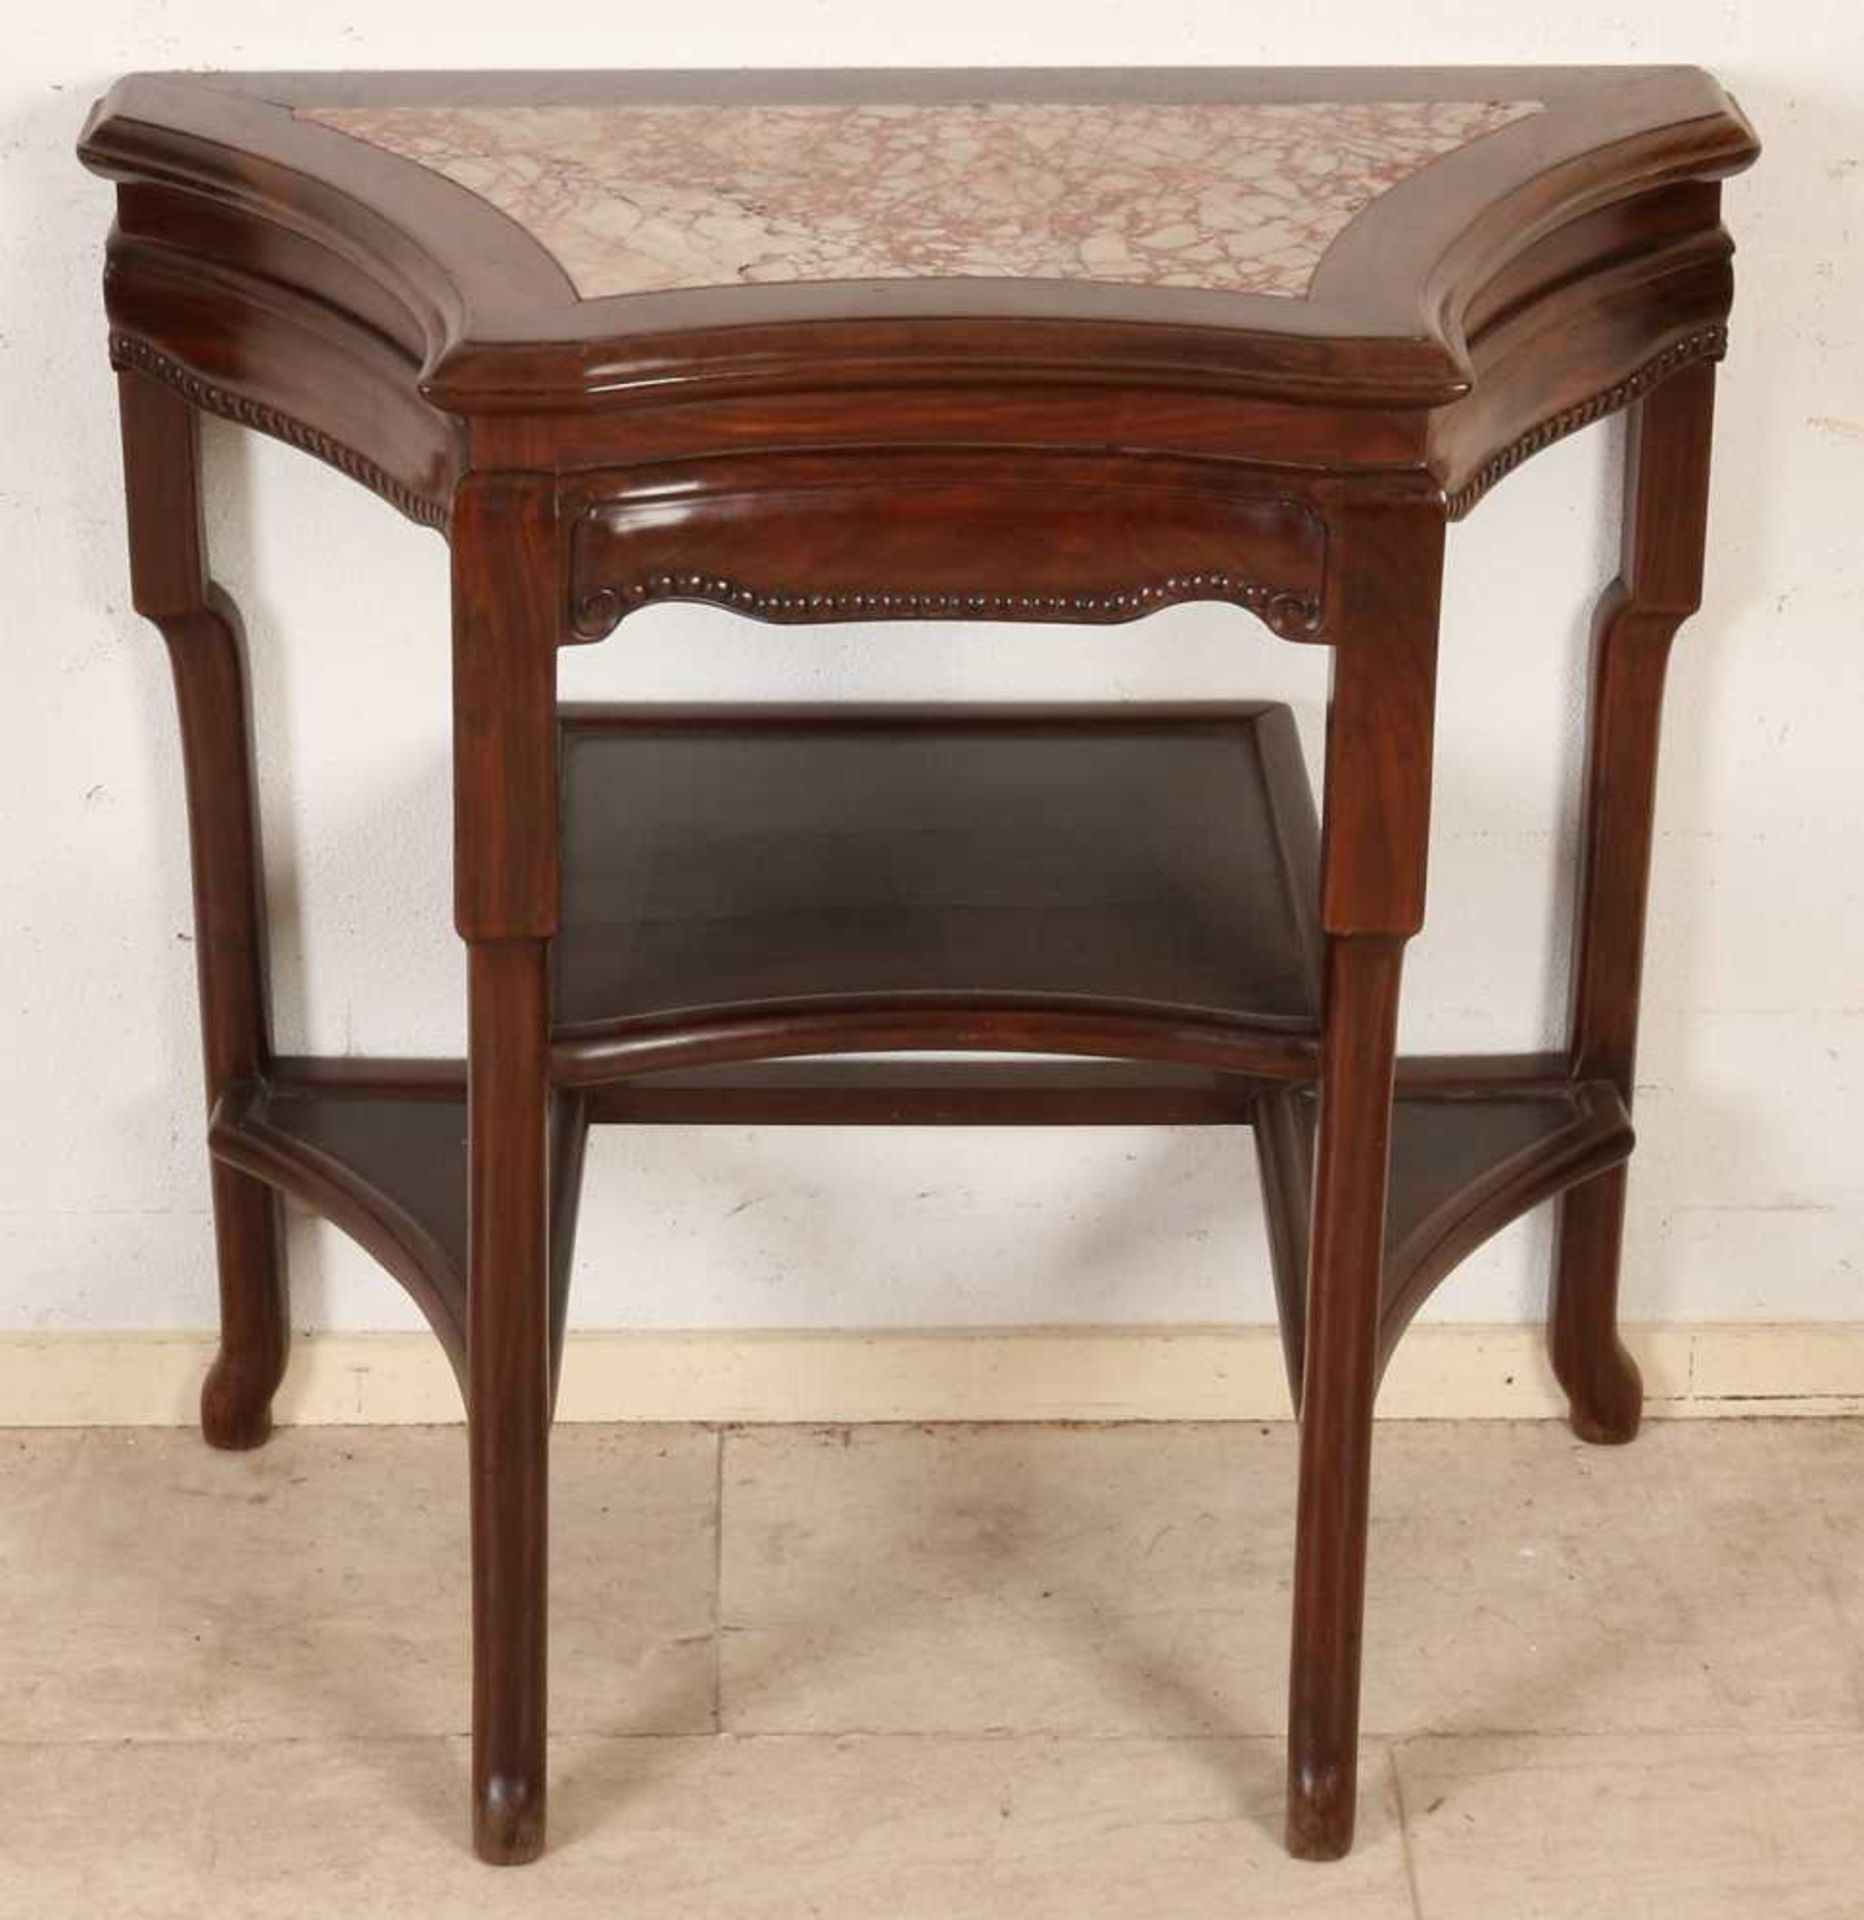 Antique Chinese side table with marble top floors. First half 20th century. Size: 80 x 81 x 42 cm.